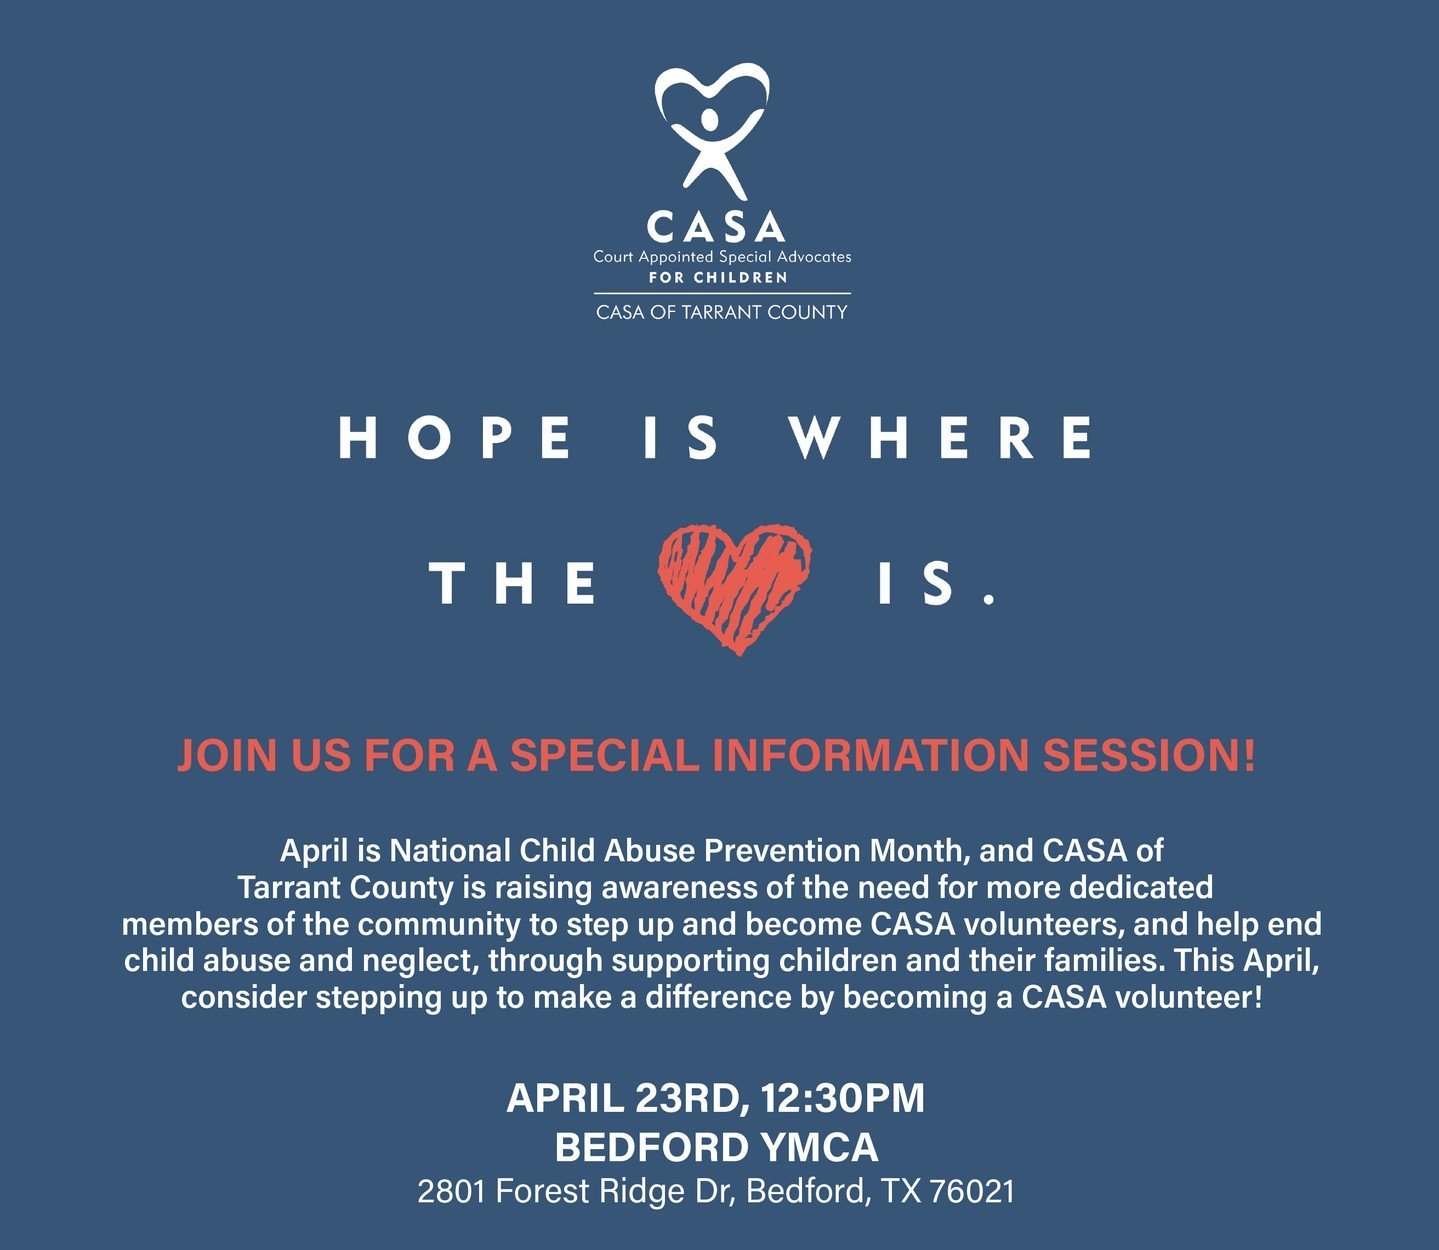 Join us for a special information session during Child Abuse Prevention Month at the Bedford YMCA! 🌟 Discover how you can make a difference in a child's life by becoming a CASA volunteer. CASA volunteers advocate for the best interests of children i